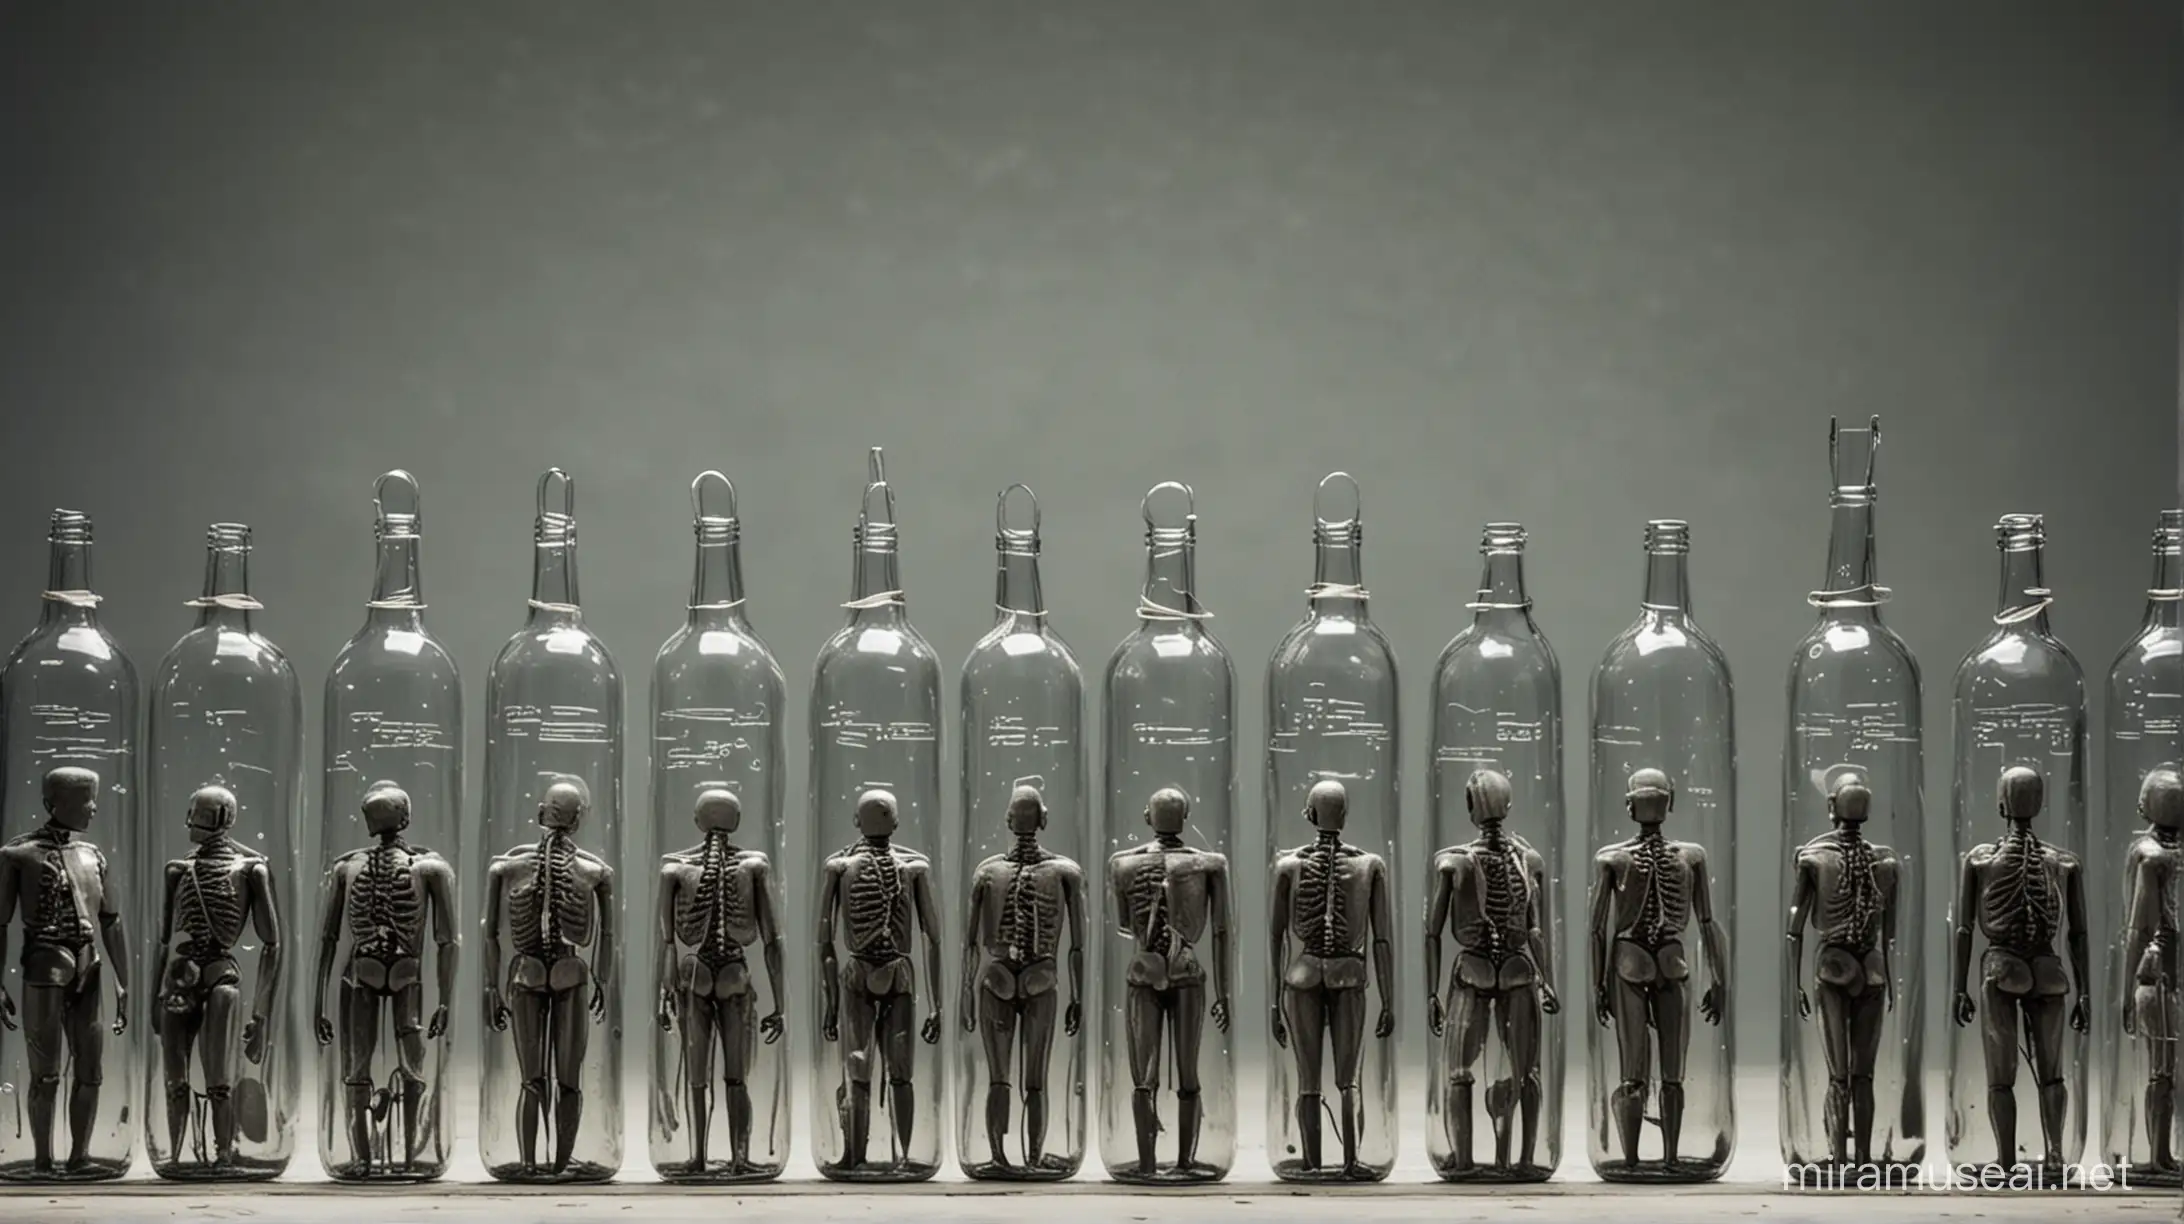 An orchestra of musicians whose musicians are not human. They are like glass bottles.